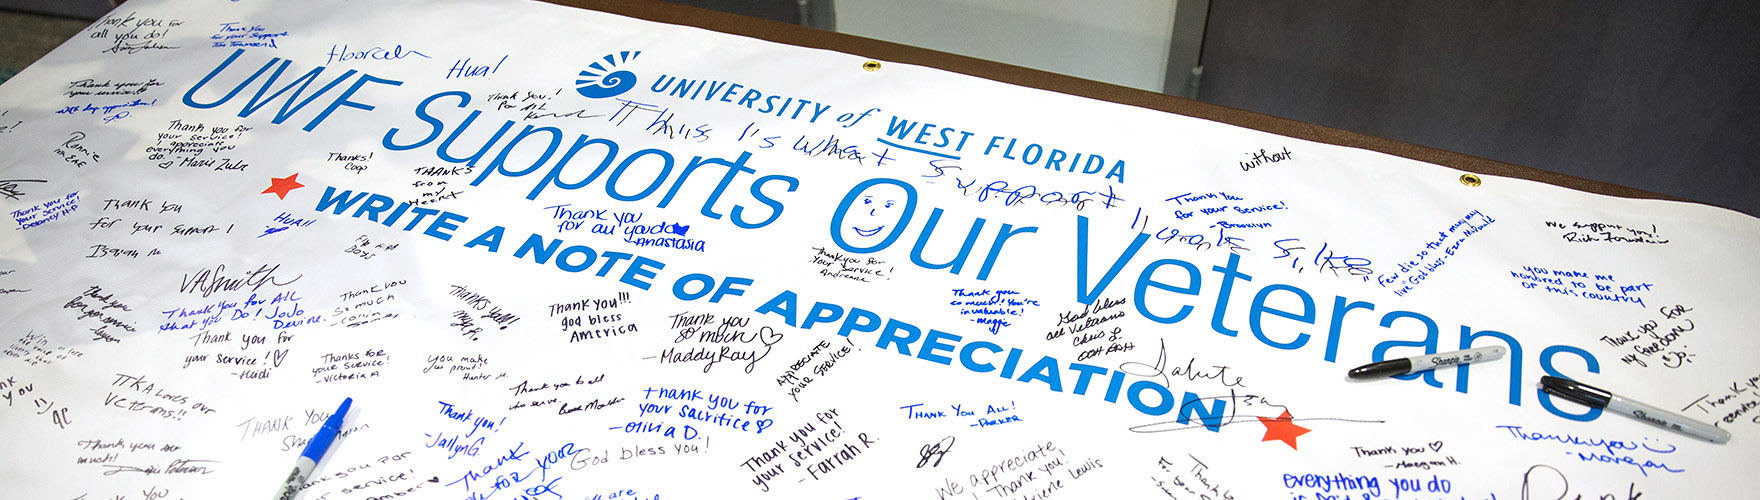 A UWF Supports Our Veterans banner shows signatures of appreciation